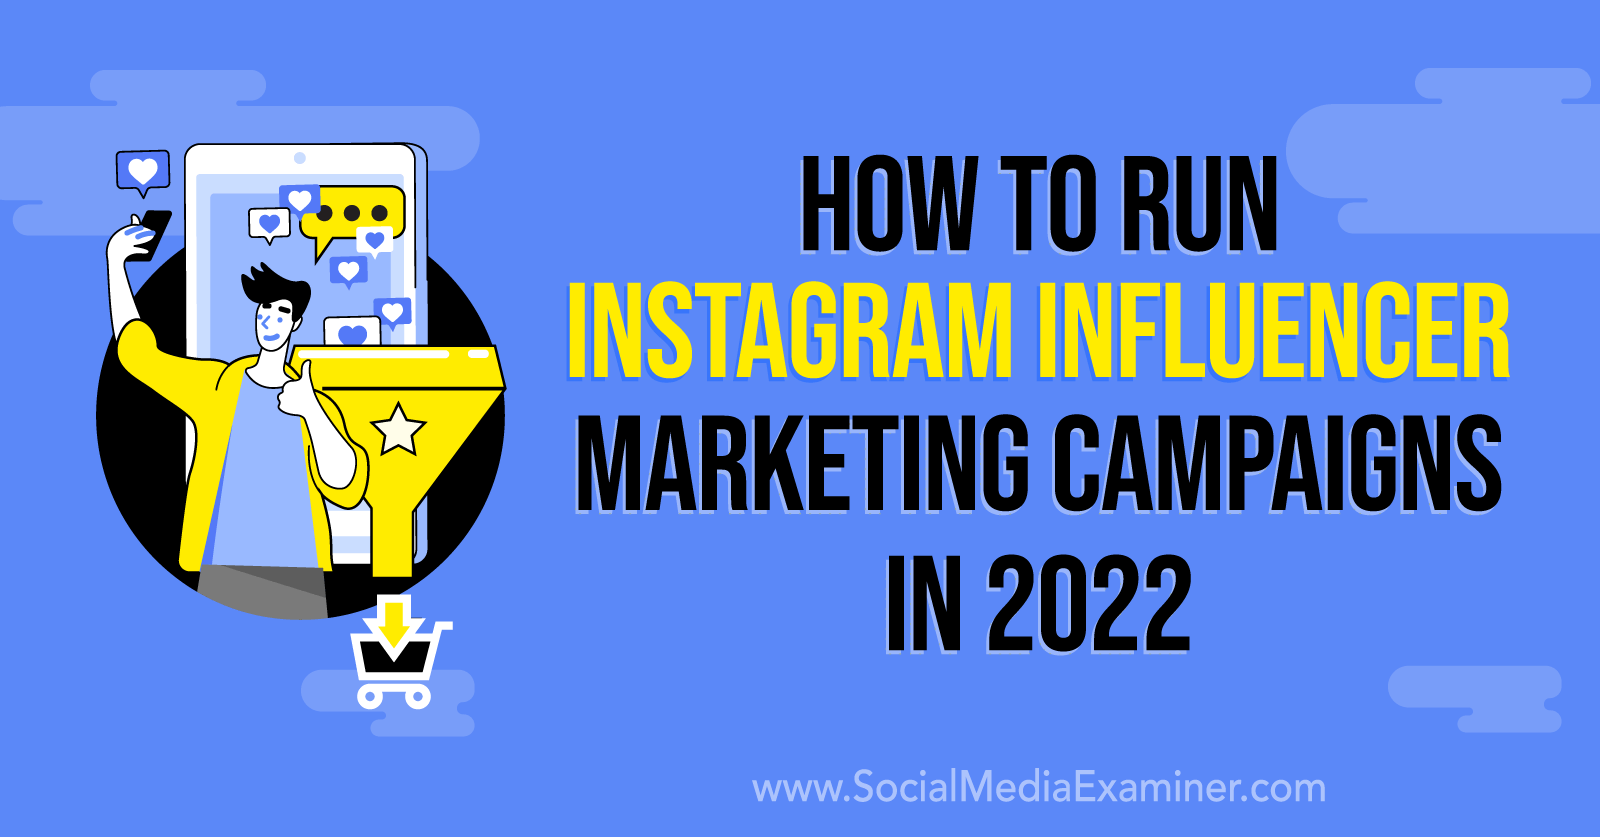 How to Run Instagram Influencer Marketing Campaigns in 2022 by Anna Sonnenberg